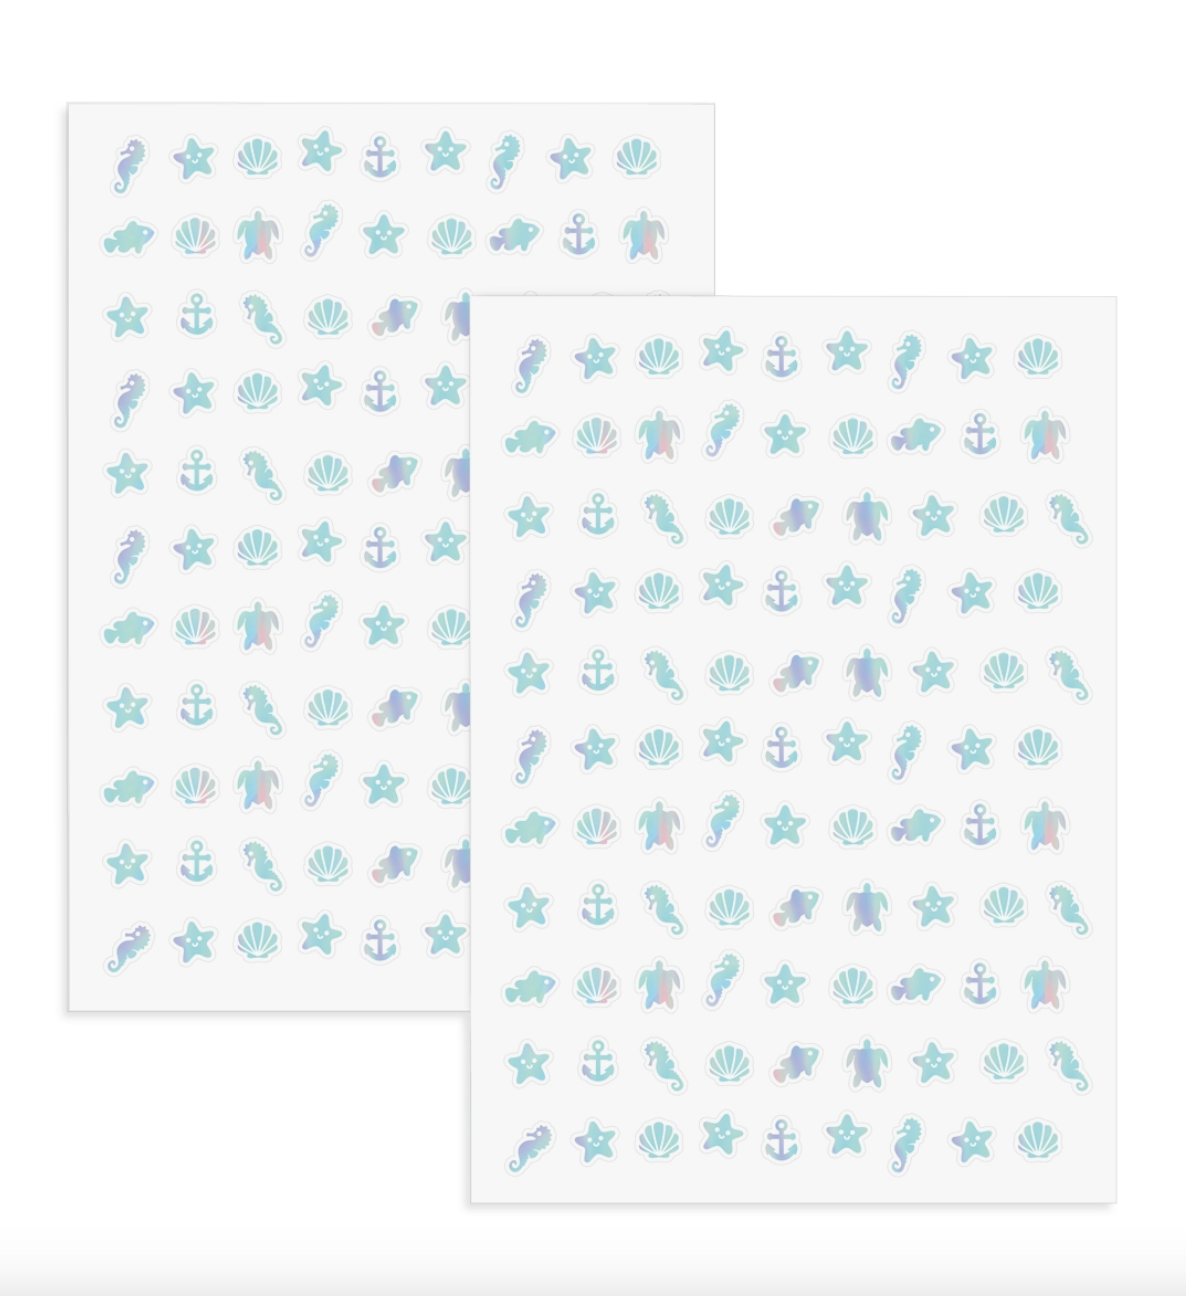 Undersea Nail Stickers - 2 Sheets